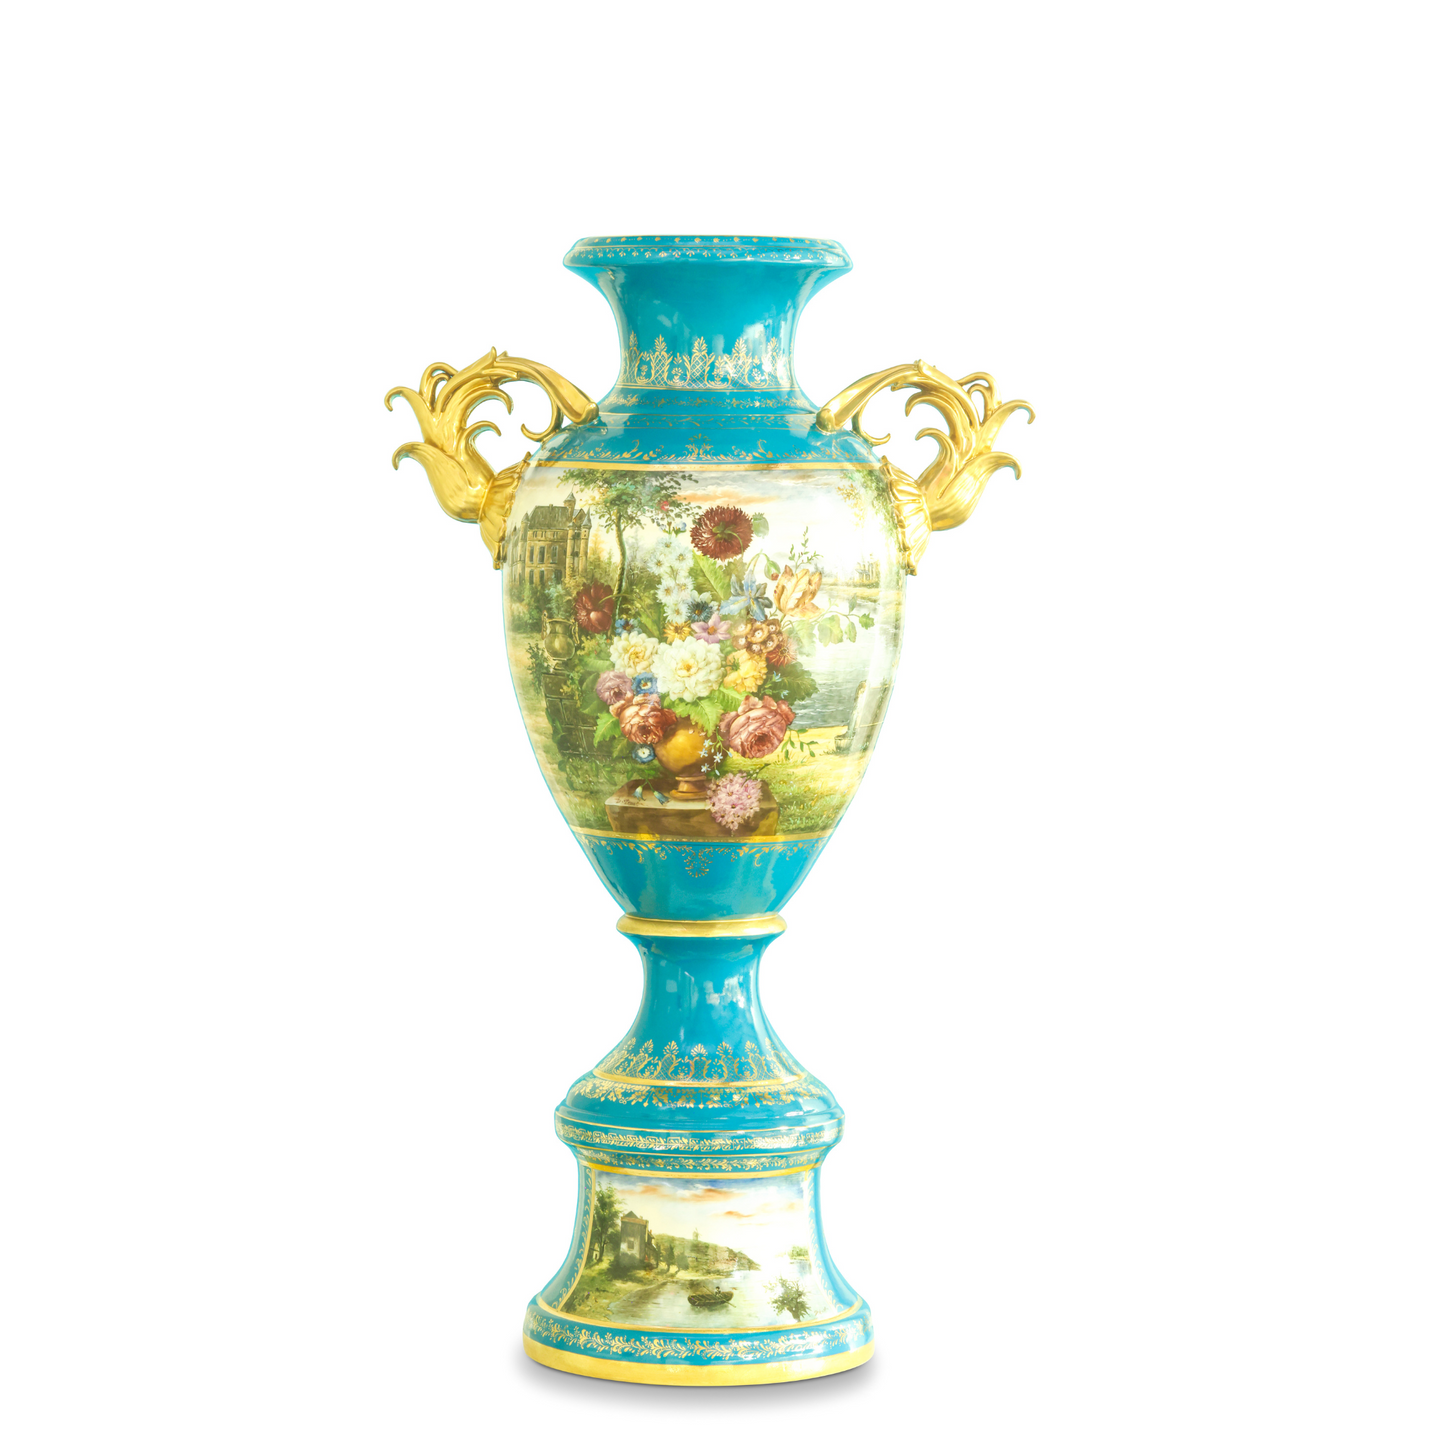 Teal Baroque Style Hand-Painted Floral Motif Vase